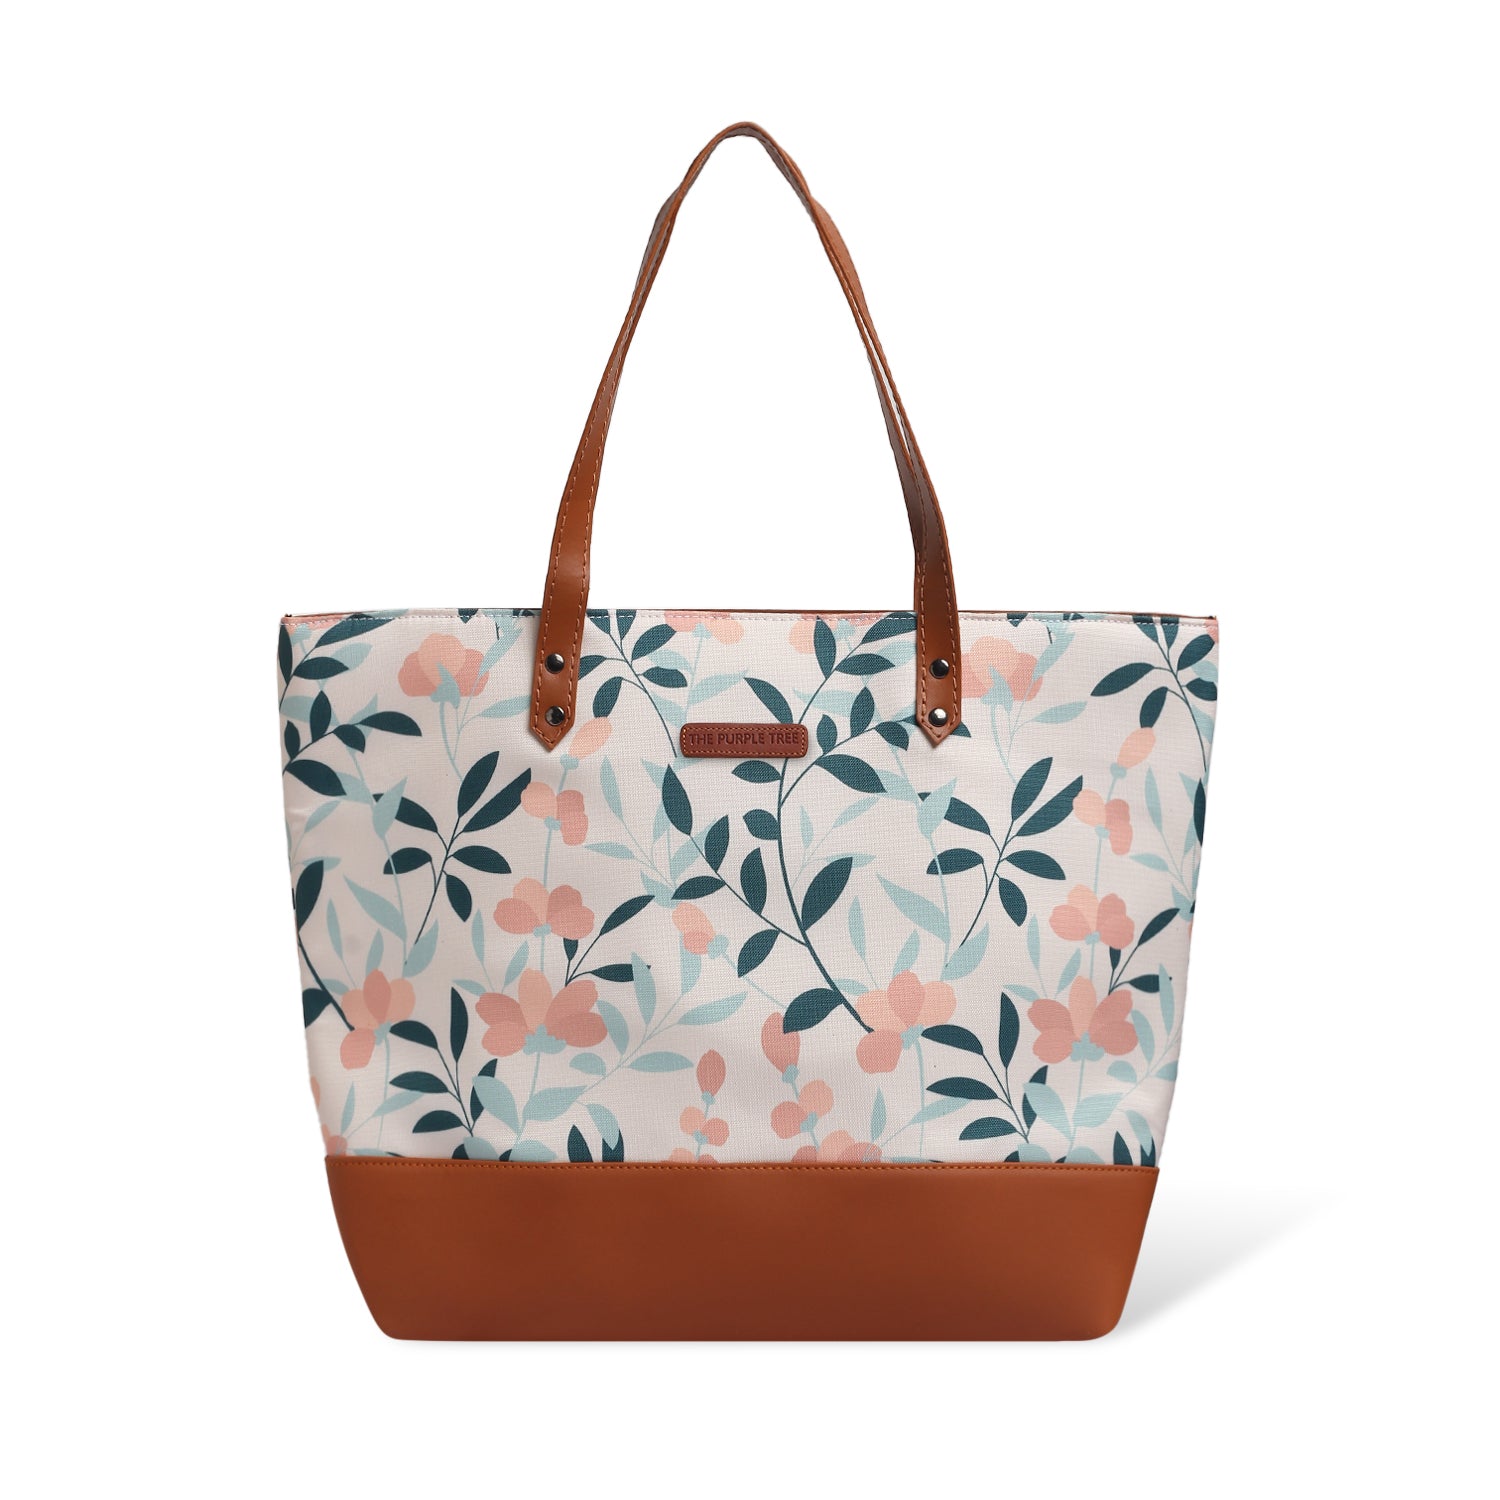 Fashionable tote bag with floral print and leather handle